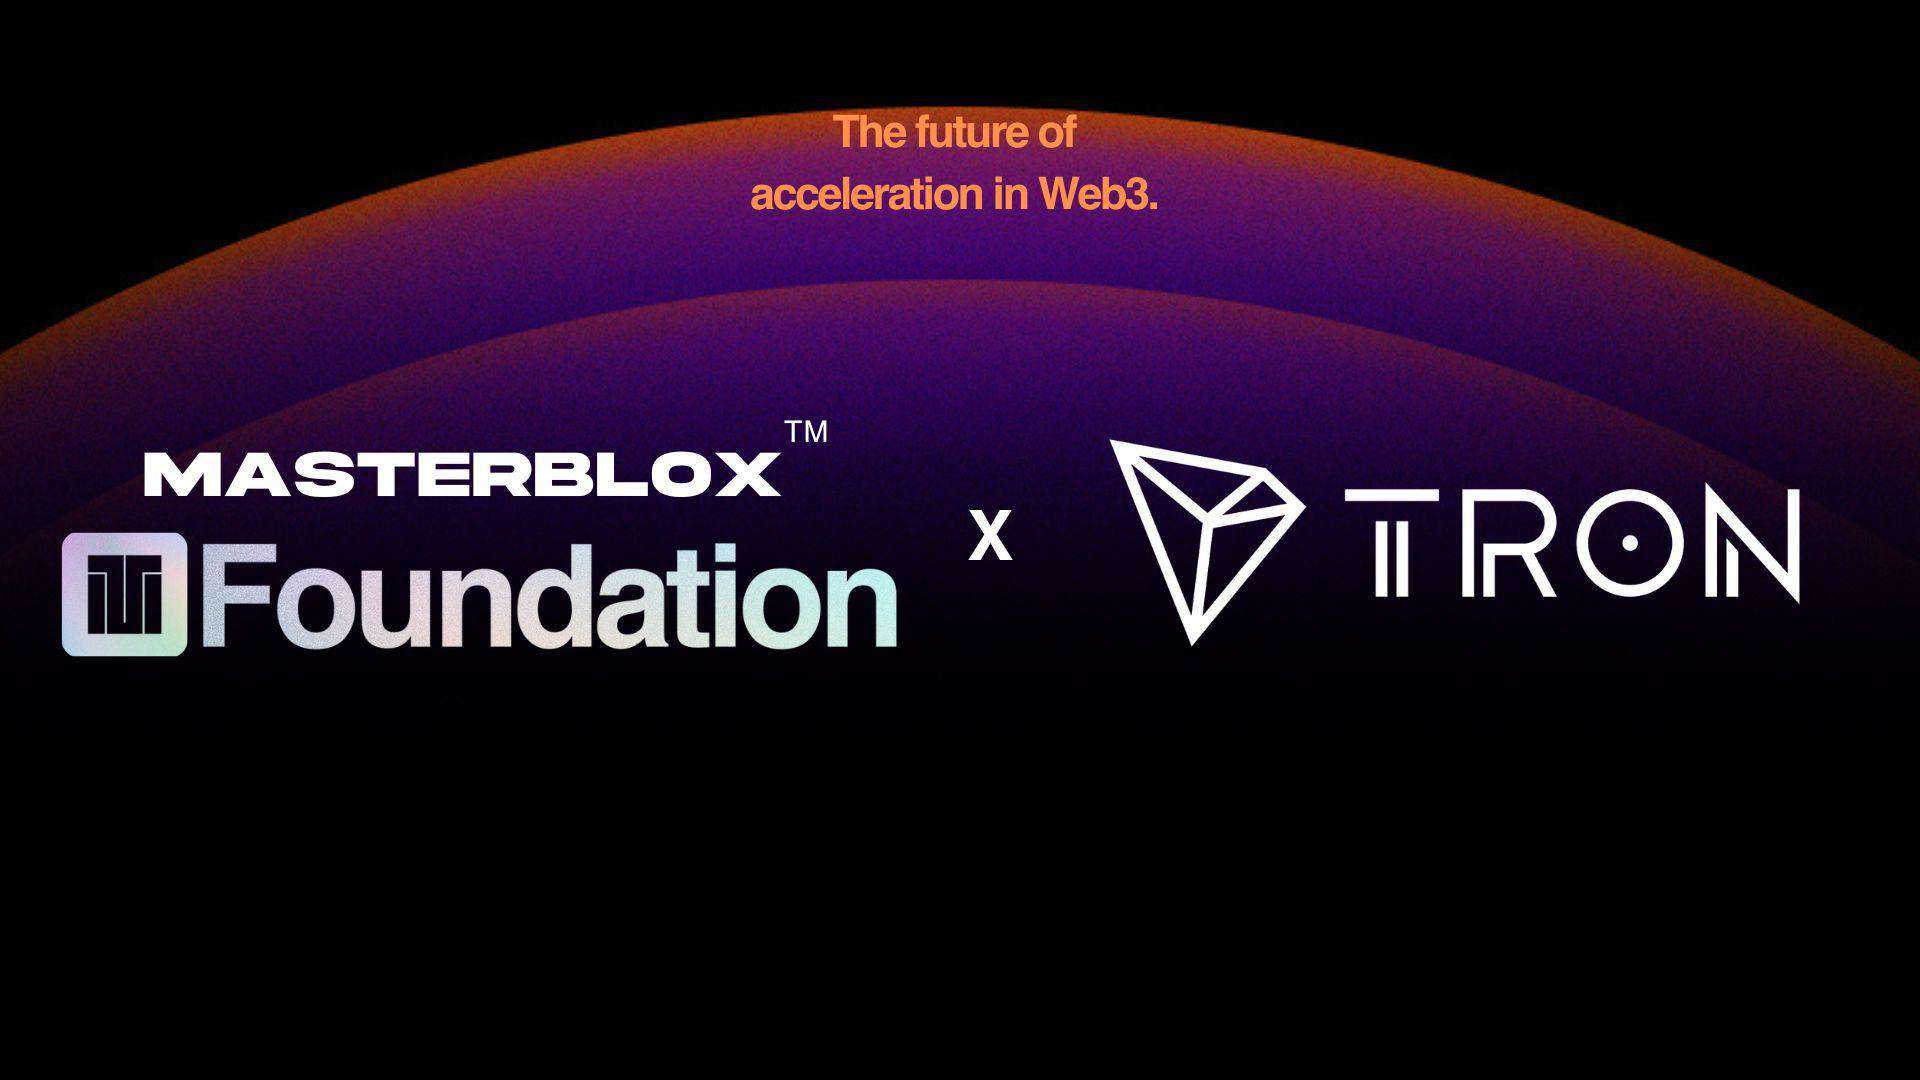 Tron-dao-and-masterblox:-the-future-of-acceleration-in-web3